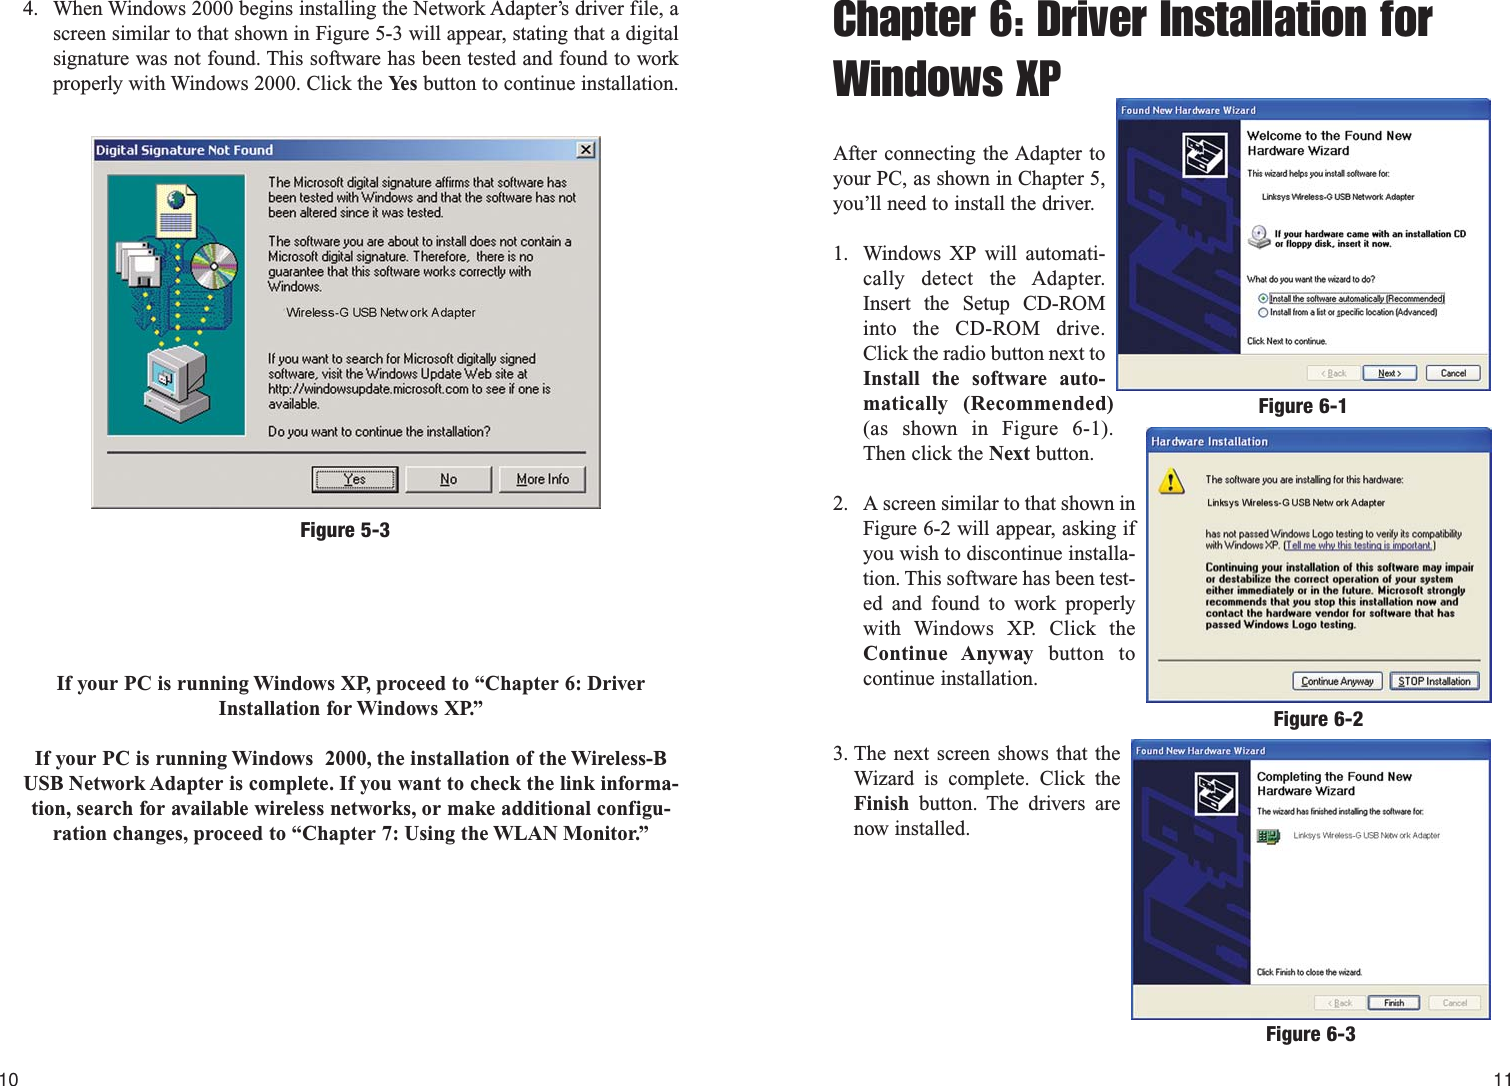 Chapter 6: Driver Installation forWindows XPAfter connecting the Adapter toyour PC, as shown in Chapter 5,you’ll need to install the driver.1. Windows XP will automati-cally detect the Adapter.Insert the Setup CD-ROMinto the CD-ROM drive.Click the radio button next toInstall the software auto-matically (Recommended)(as shown in Figure 6-1).Then click the Next button.2. A screen similar to that shown inFigure 6-2 will appear, asking ifyou wish to discontinue installa-tion. This software has been test-ed and found to work properlywith Windows XP. Click theContinue Anyway button tocontinue installation.3. The next screen shows that theWizard is complete. Click theFinish button. The drivers arenow installed.11104. When Windows 2000 begins installing the Network Adapter’s driver file, ascreen similar to that shown in Figure 5-3 will appear, stating that a digitalsignature was not found. This software has been tested and found to workproperly with Windows 2000. Click the Ye s button to continue installation.If your PC is running Windows XP, proceed to “Chapter 6: DriverInstallation for Windows XP.”If your PC is running Windows  2000, the installation of the Wireless-BUSB Network Adapter is complete. If you want to check the link informa-tion, search for available wireless networks, or make additional configu-ration changes, proceed to “Chapter 7: Using the WLAN Monitor.”Figure 5-3Figure 6-2Figure 6-1Figure 6-3